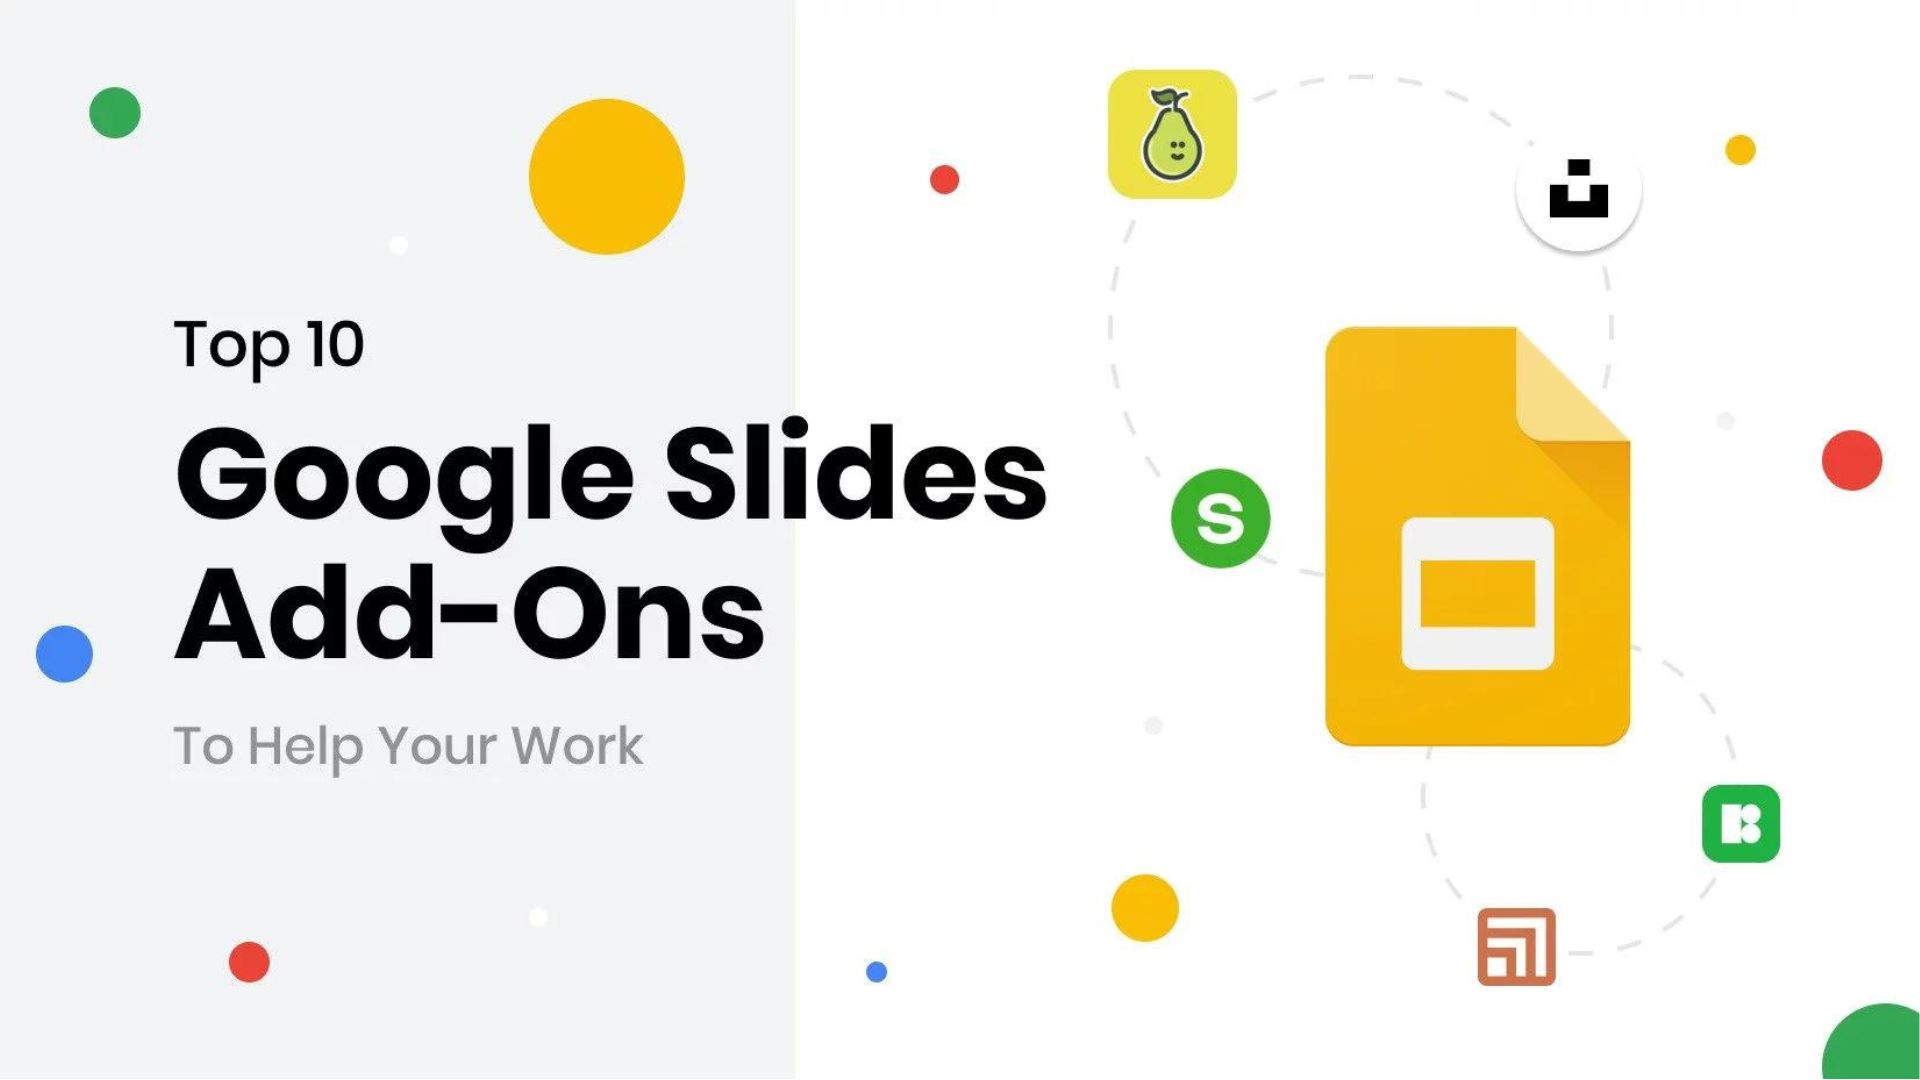 Top 10 Google Slides Add-Ons To Help Your Work